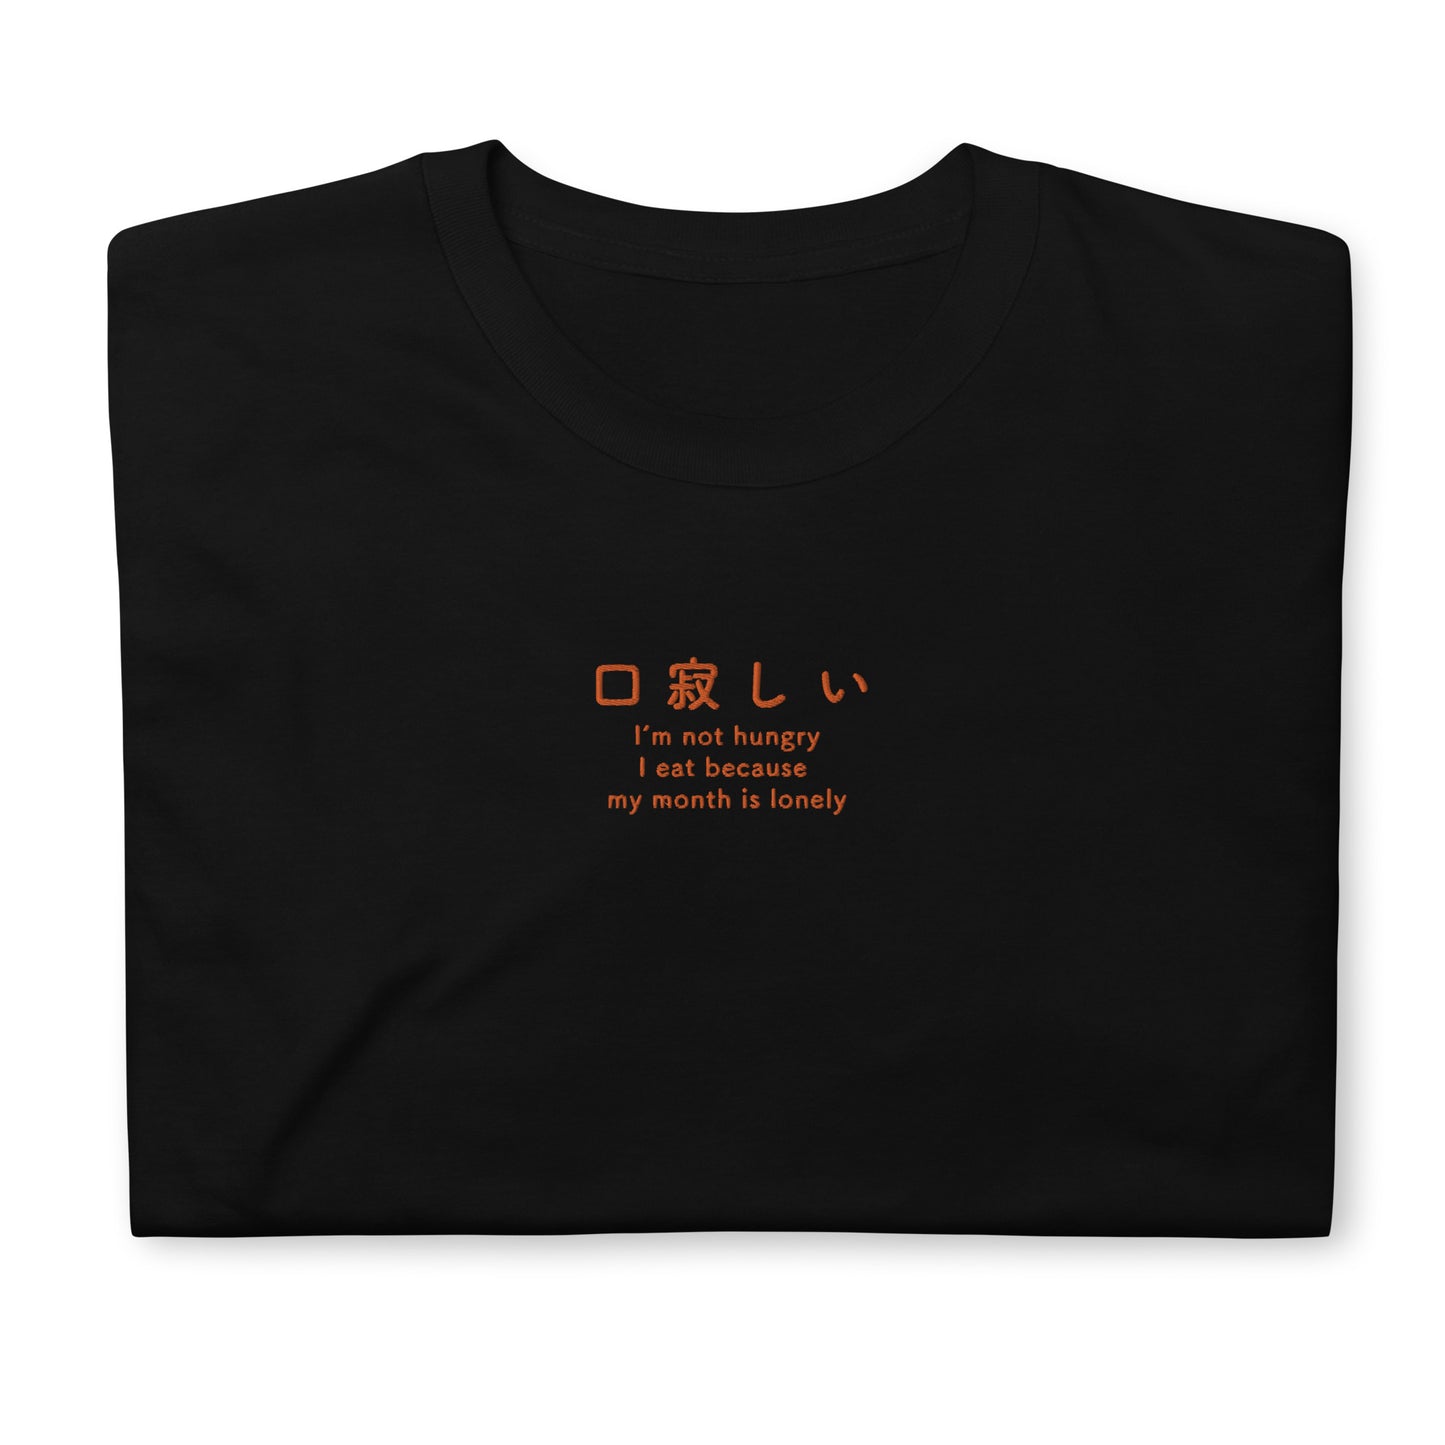 Black High Quality Tee - Front Design with an Orange Embroidery "kuchisabishi" in Japanese and English